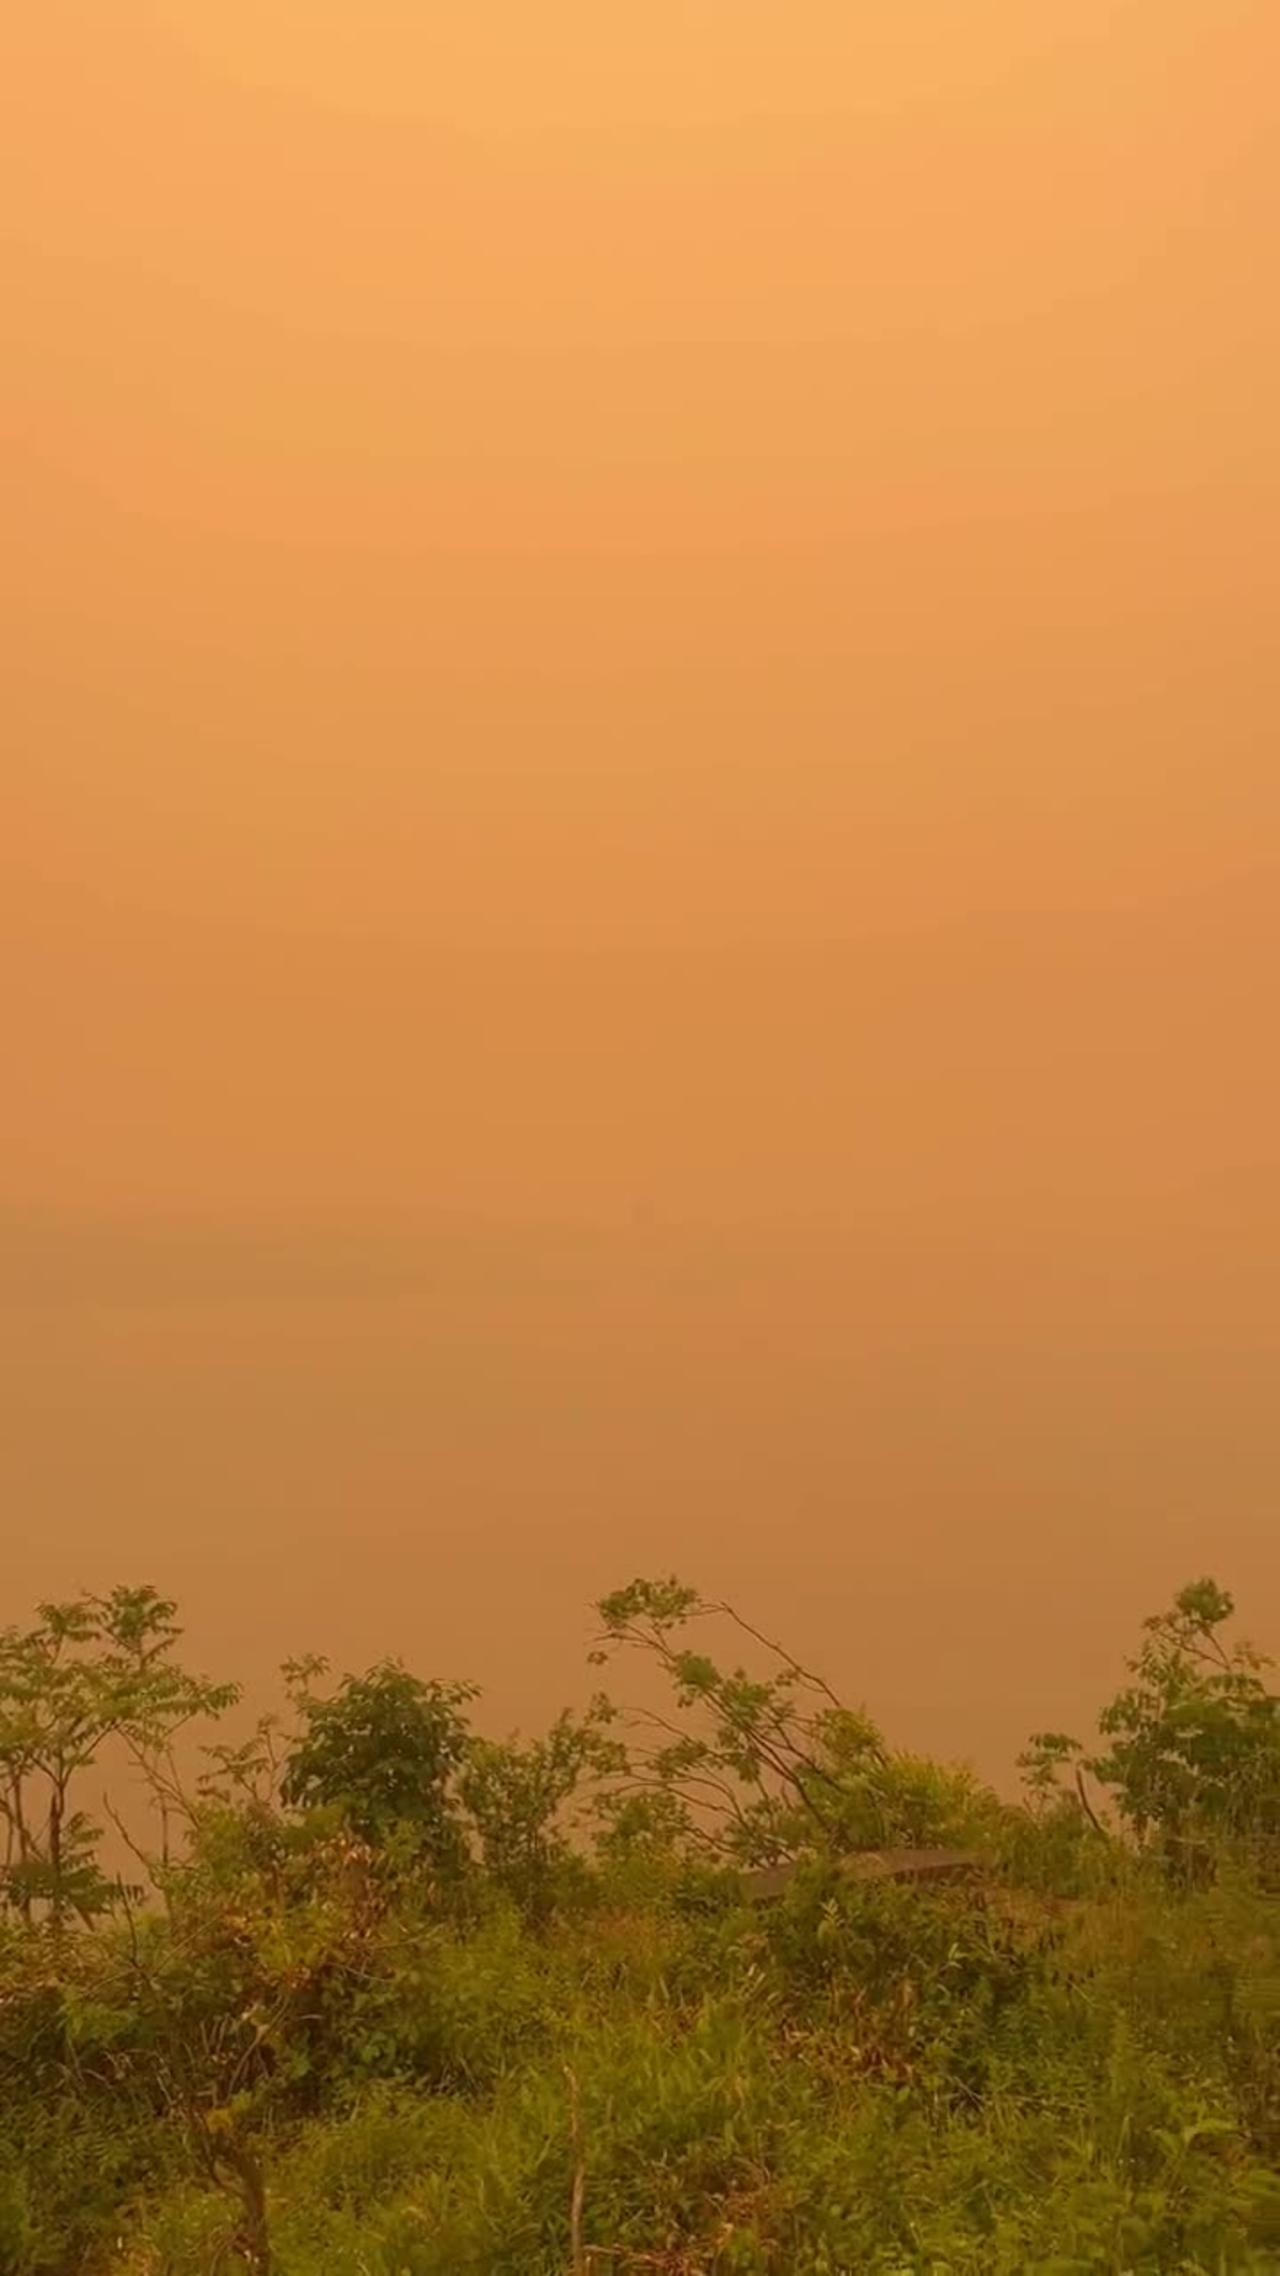 New York City is shrouded in smoke from the hundreds of wildfires